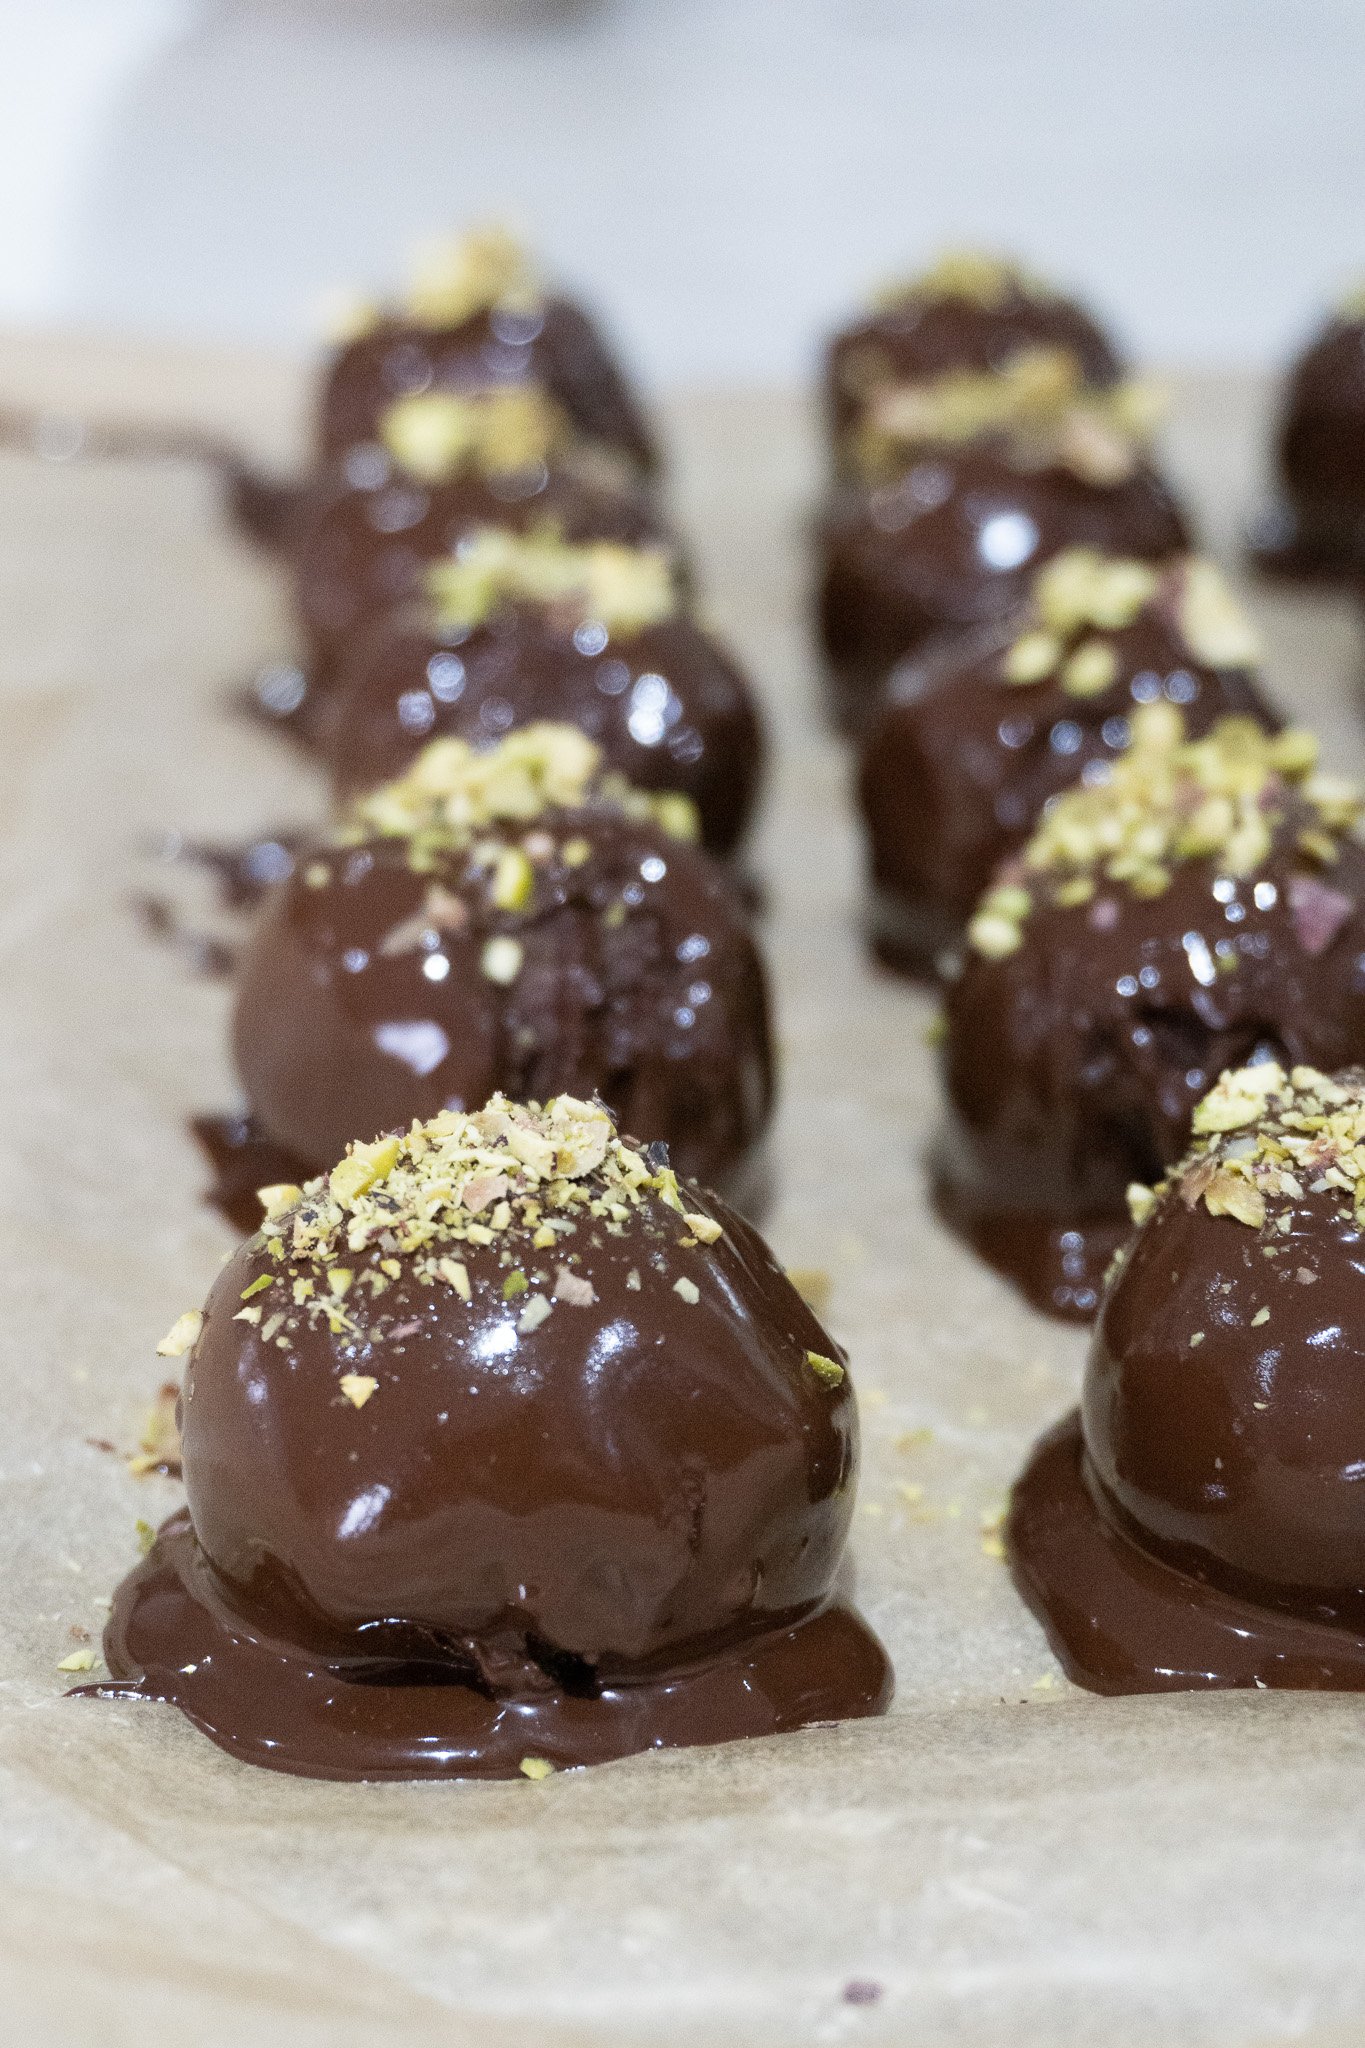 A bite-sized chocolate date truffle with a pistachio on top, perfect for a quick snack.